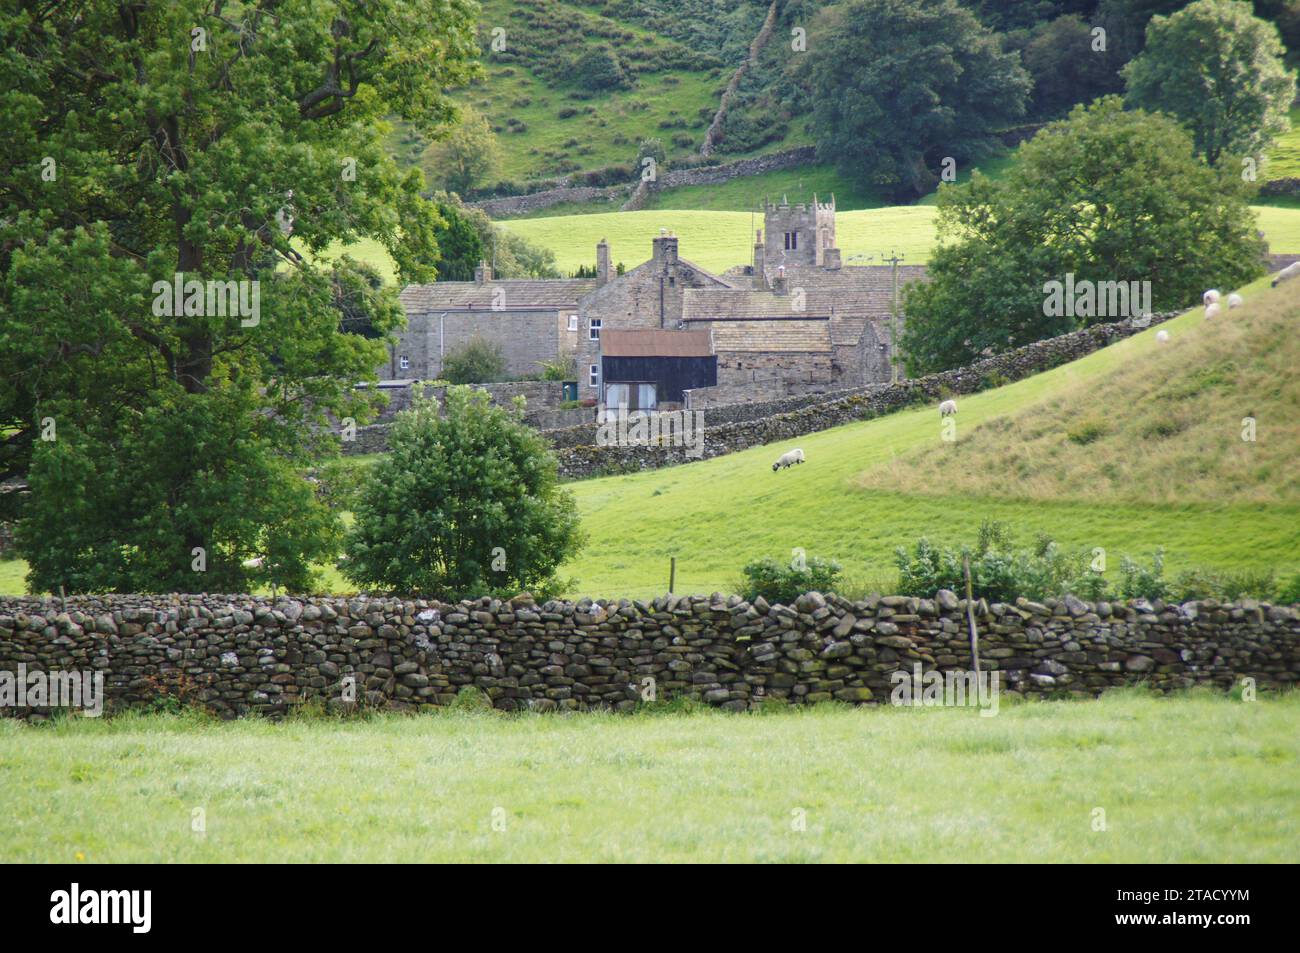 The Village of Muker, Swaledale, Yorkshire Dales, North Yorkshire, Inghilterra, REGNO UNITO Foto Stock